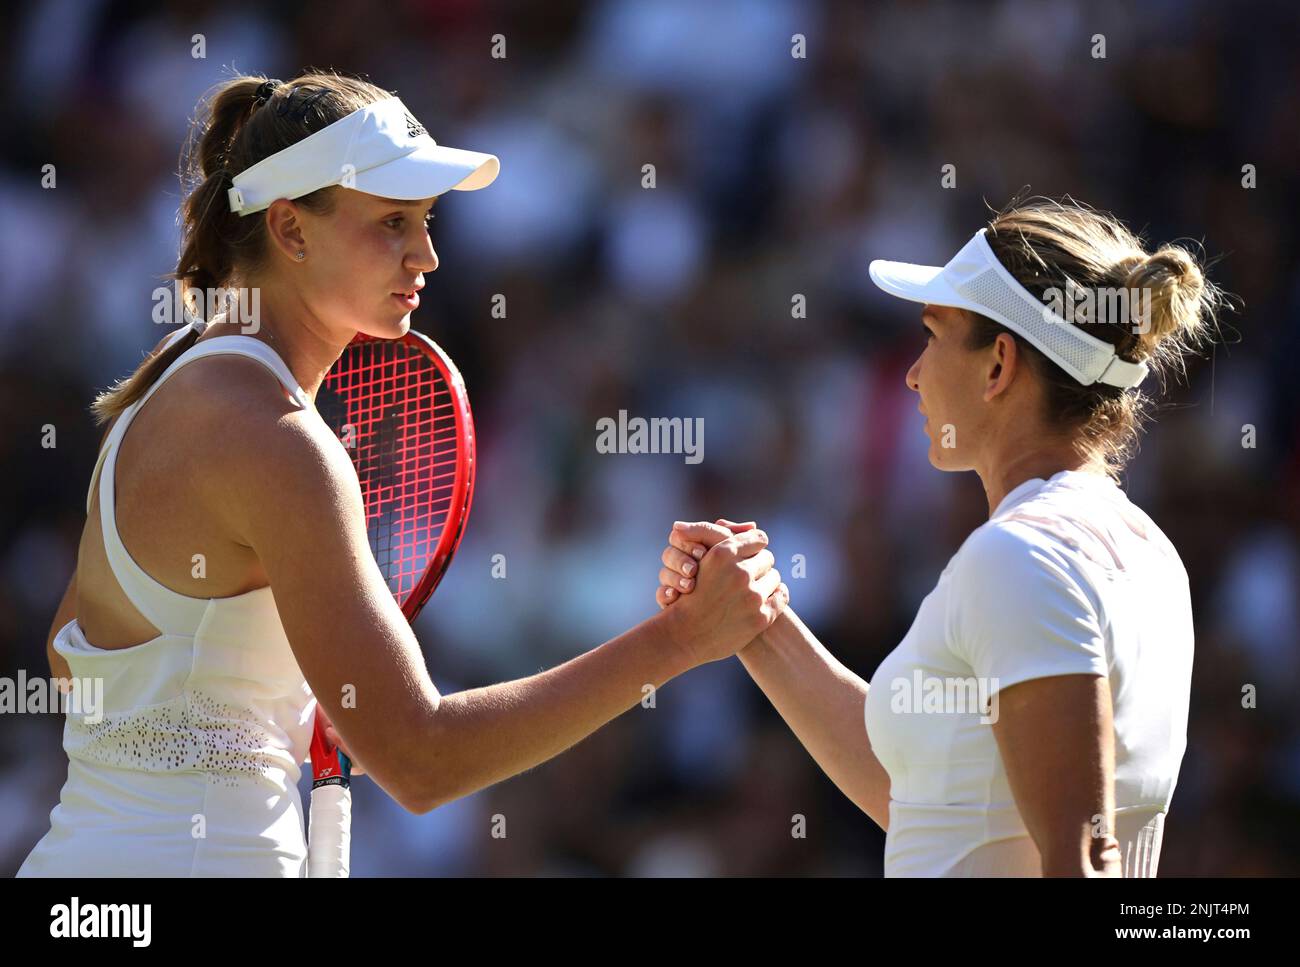 Elena Rybakina (L) of Kazakhstan shakes hands with Simona Halep of Romania after winning the ladies singles semi-finals match in the Championships, Wimbledon at All England Lawn Tennis and Croquet Club in